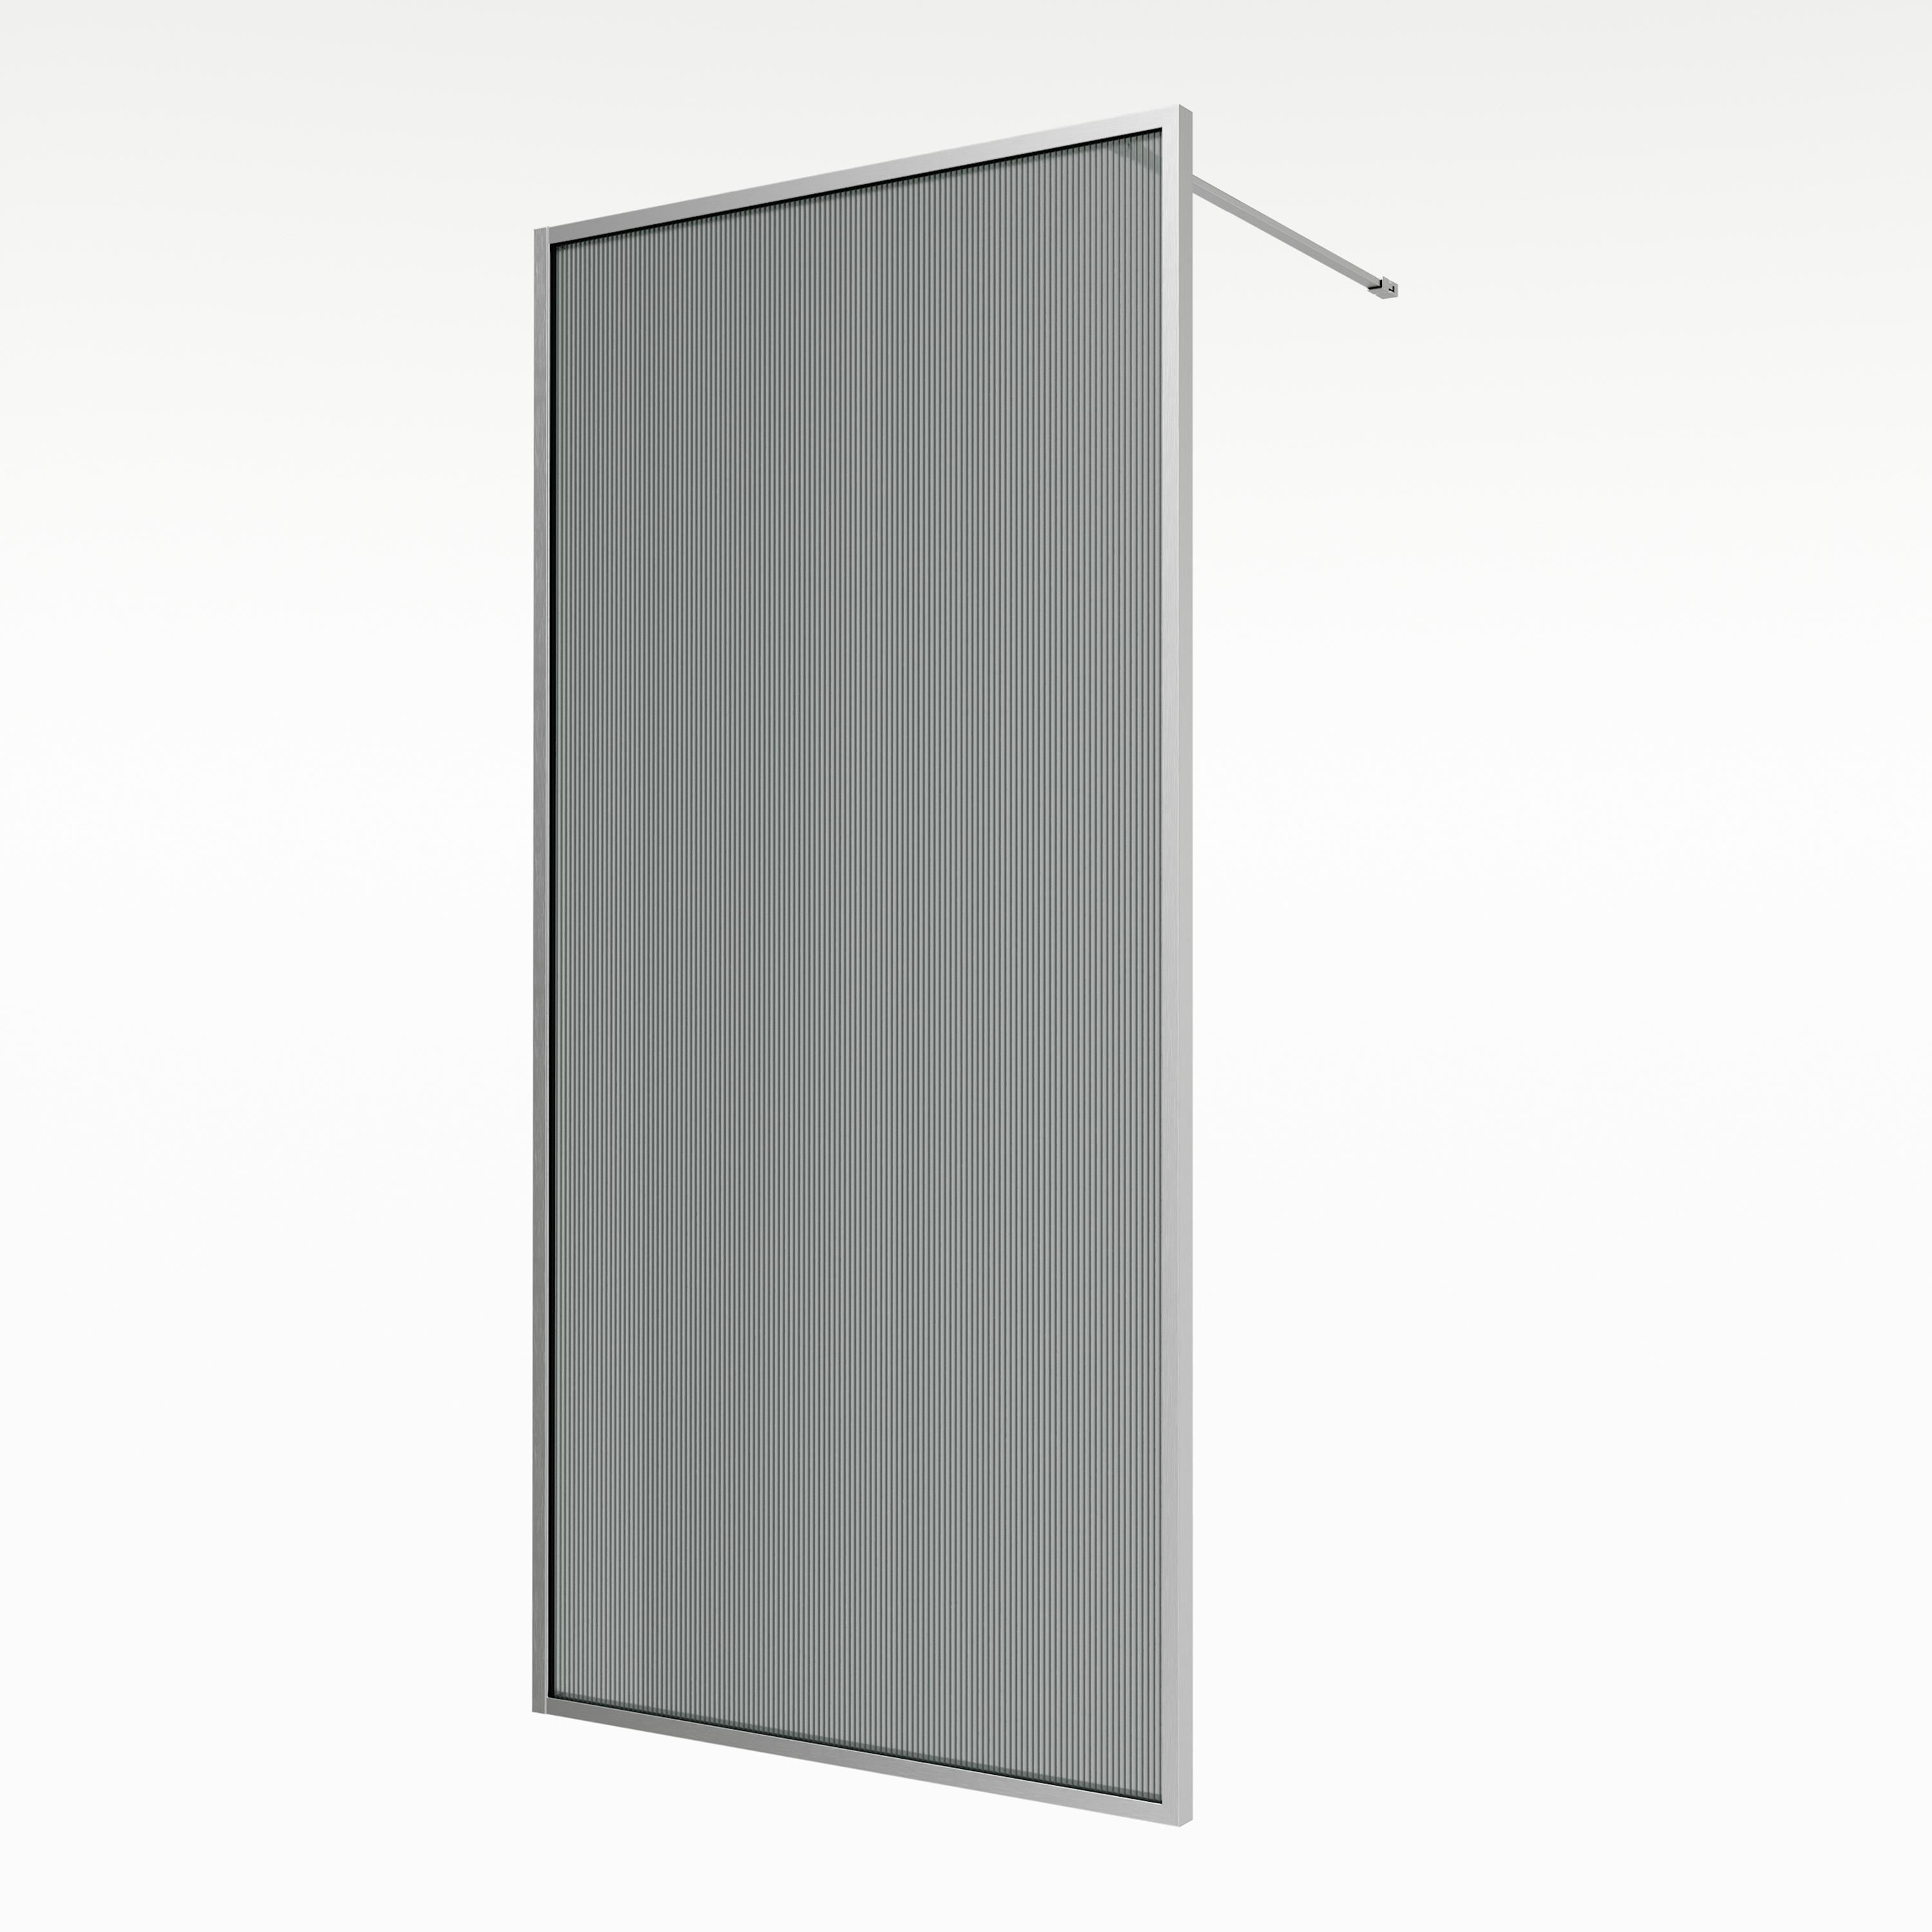 Aqualux AQ PRO Polished Silver Fluted Single Wet room glass screen (H)200cm (W)80cm